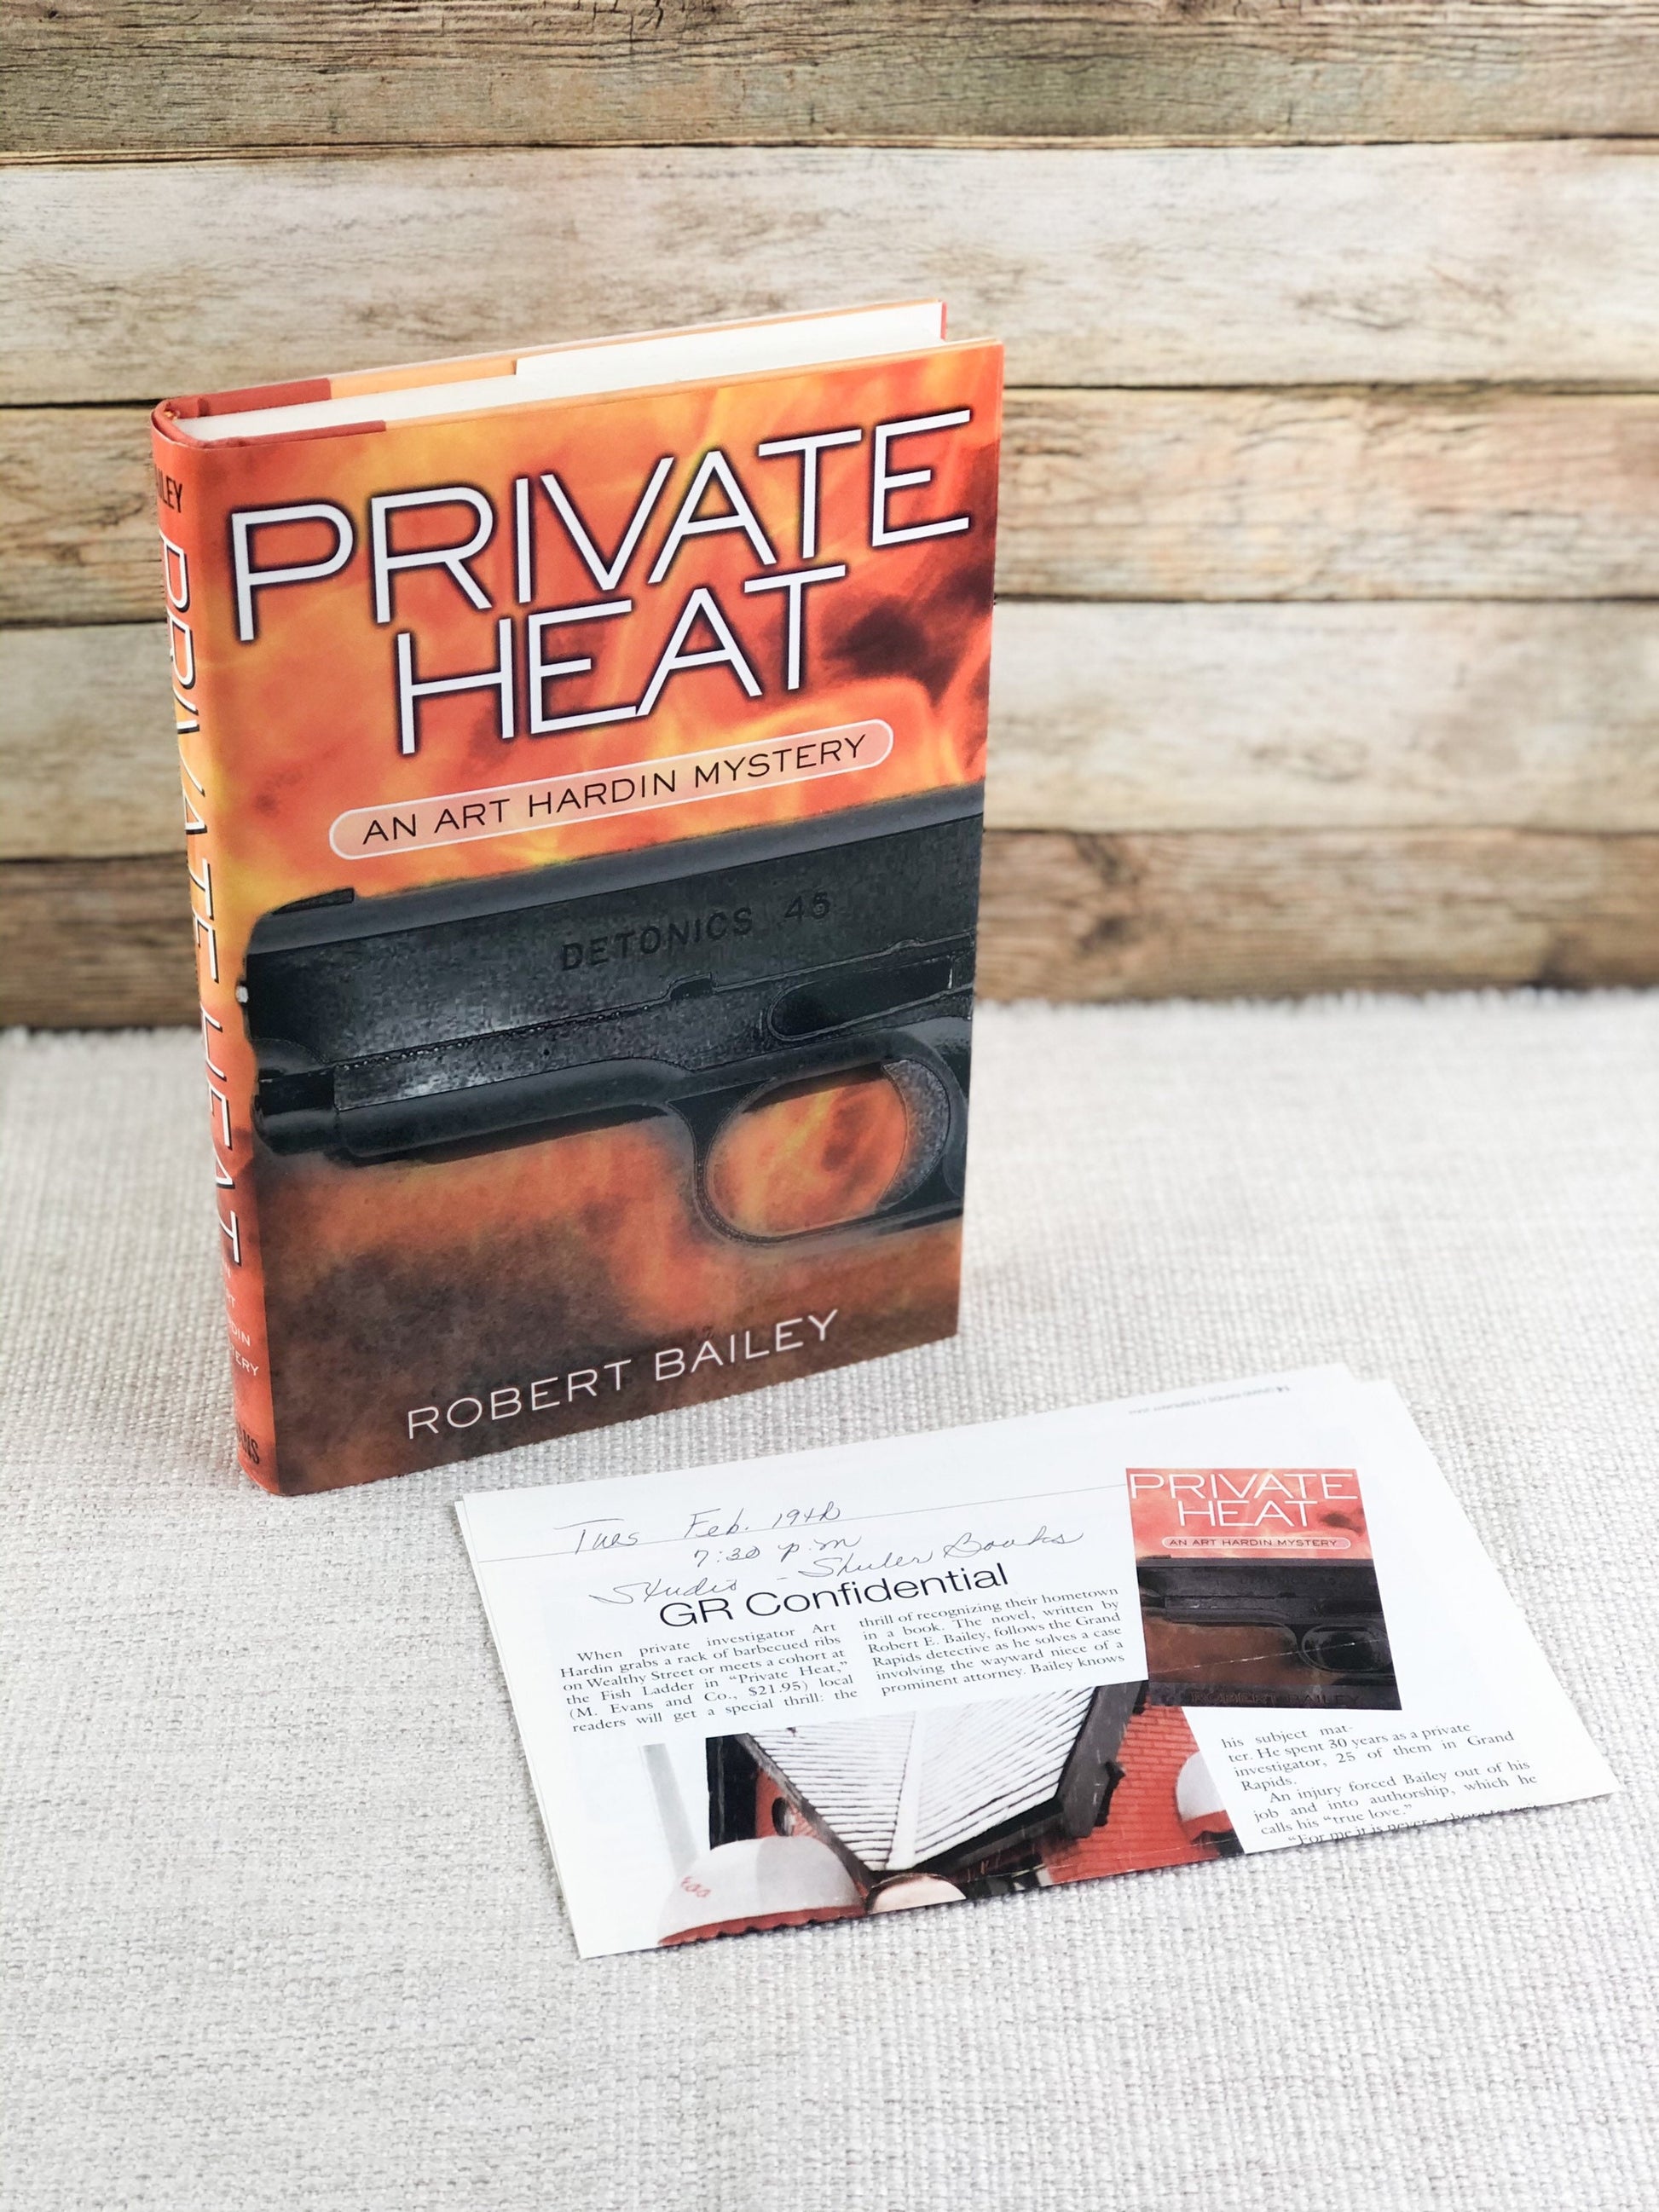 Signed First Edition Book by Robert Bailey / Private Heat